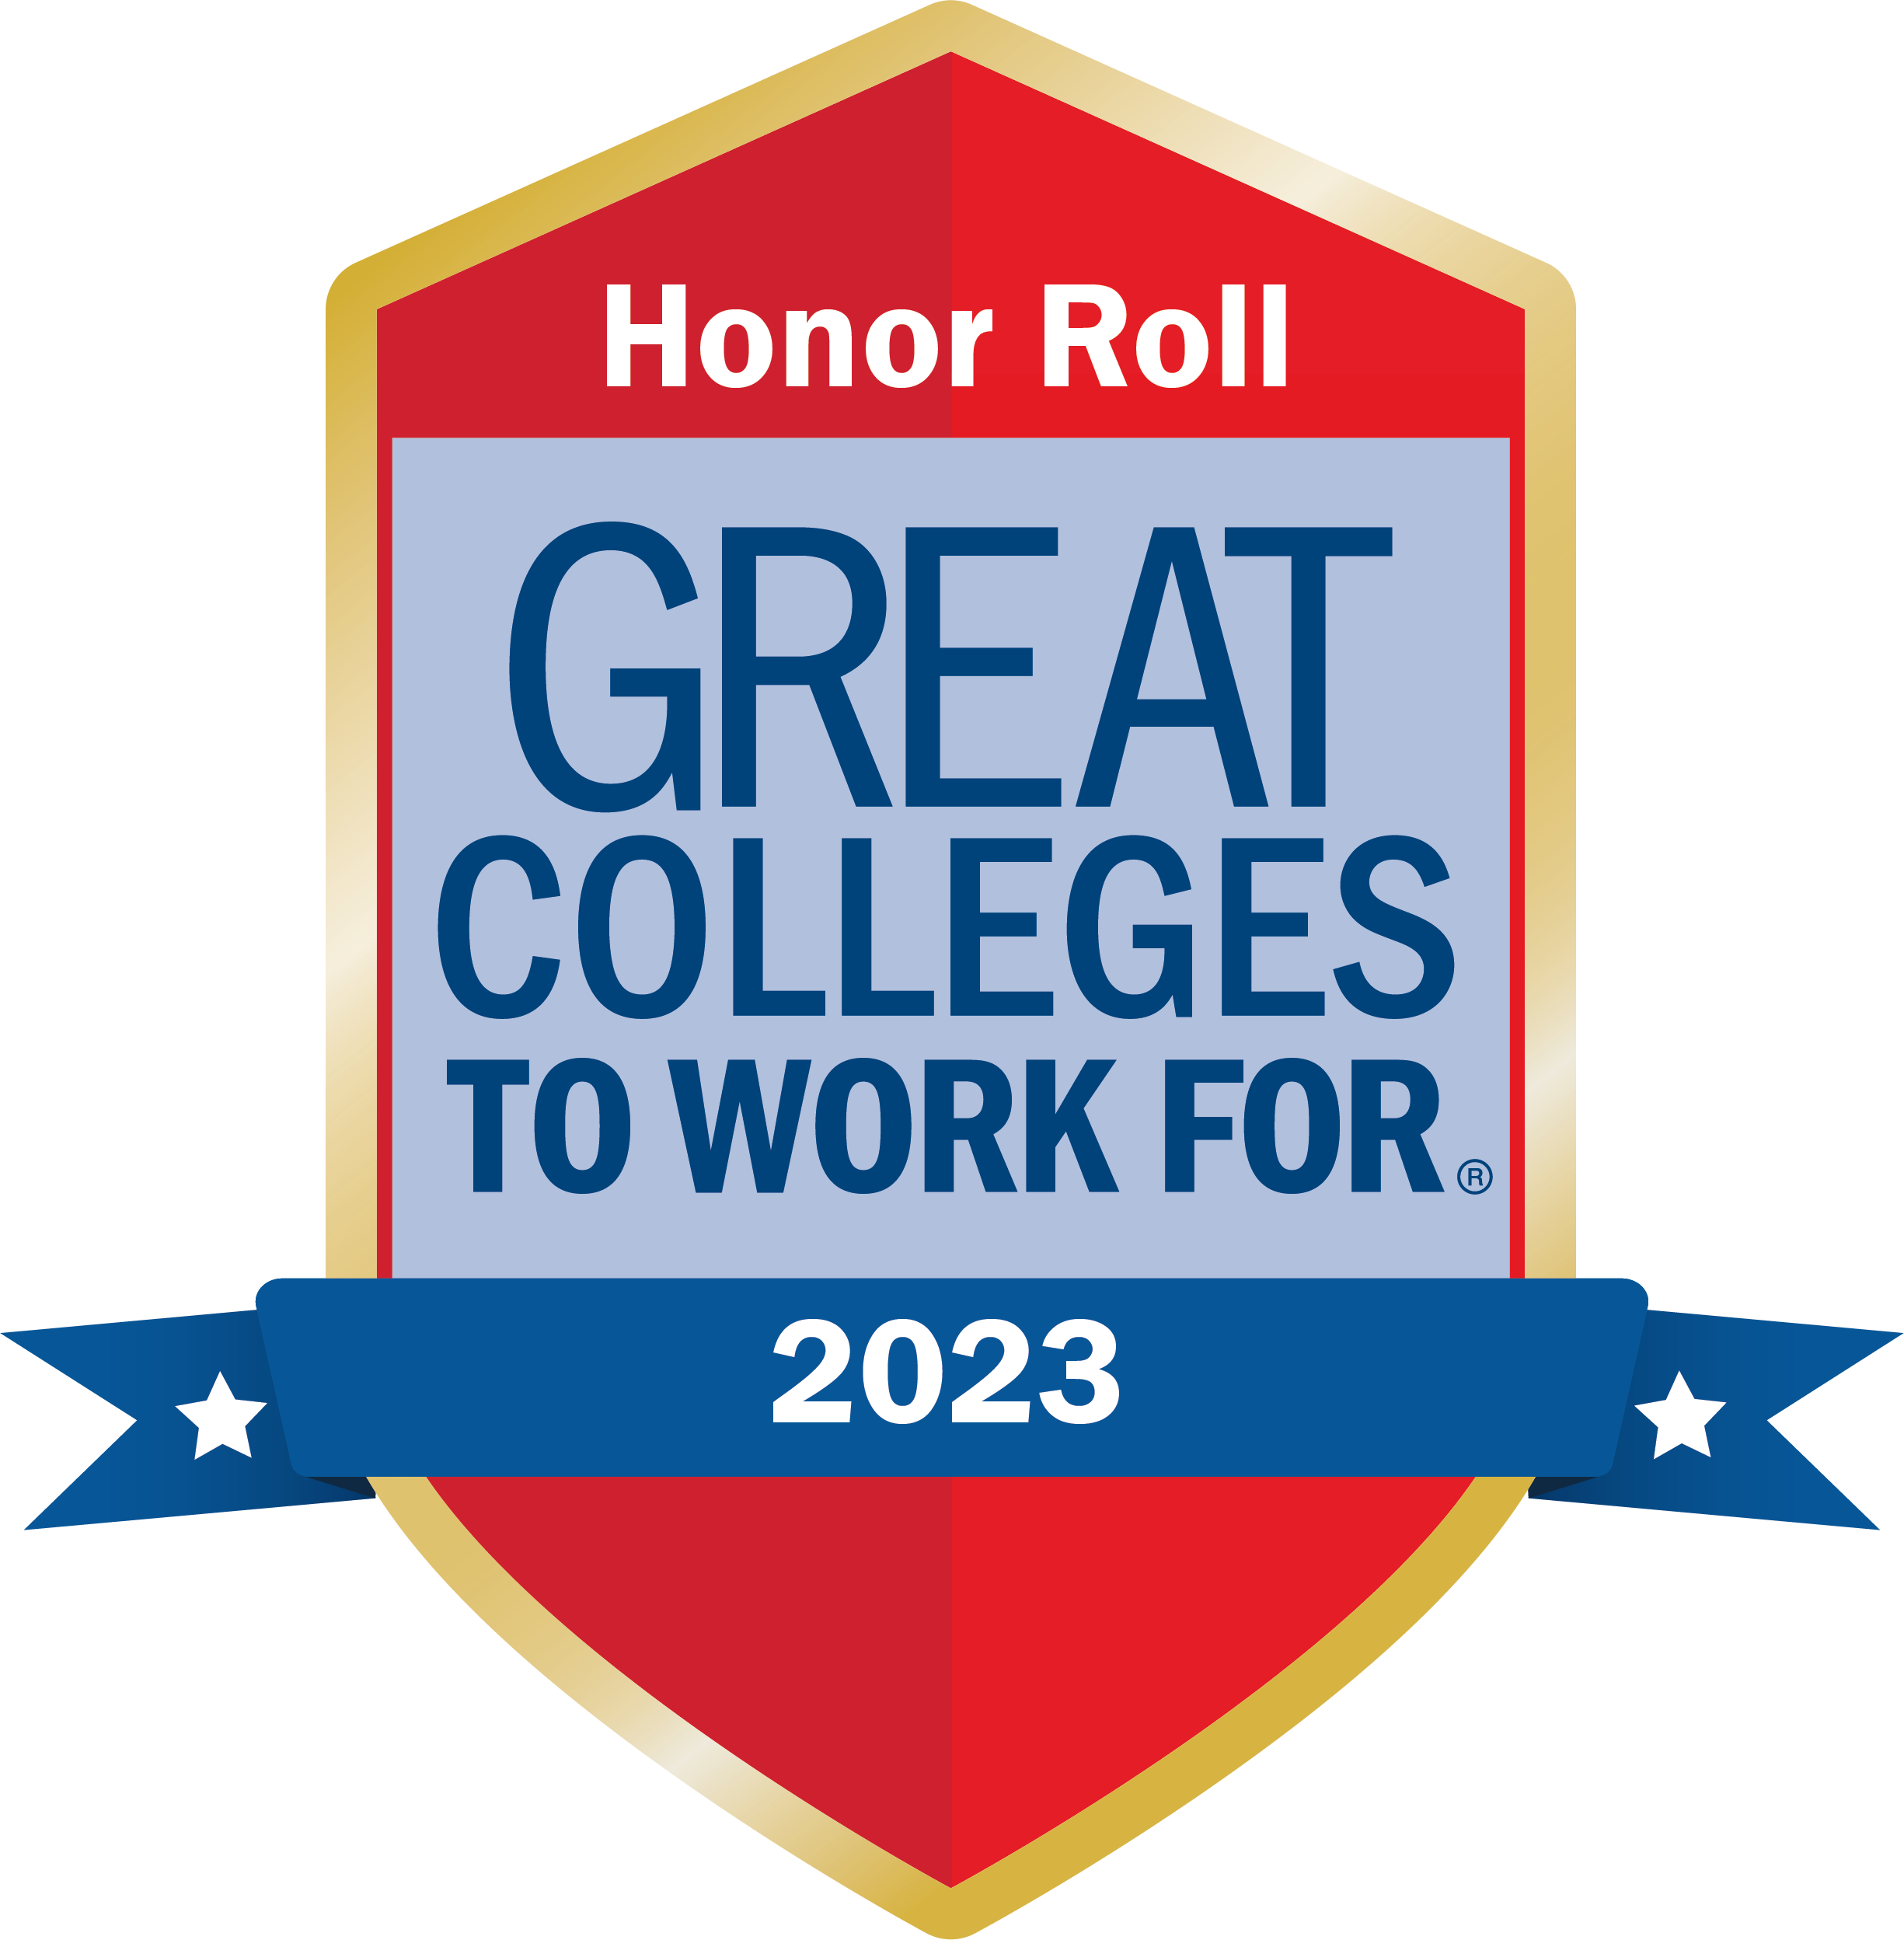 In 2023, TTUHSC was once again recognized as a great college to work for.